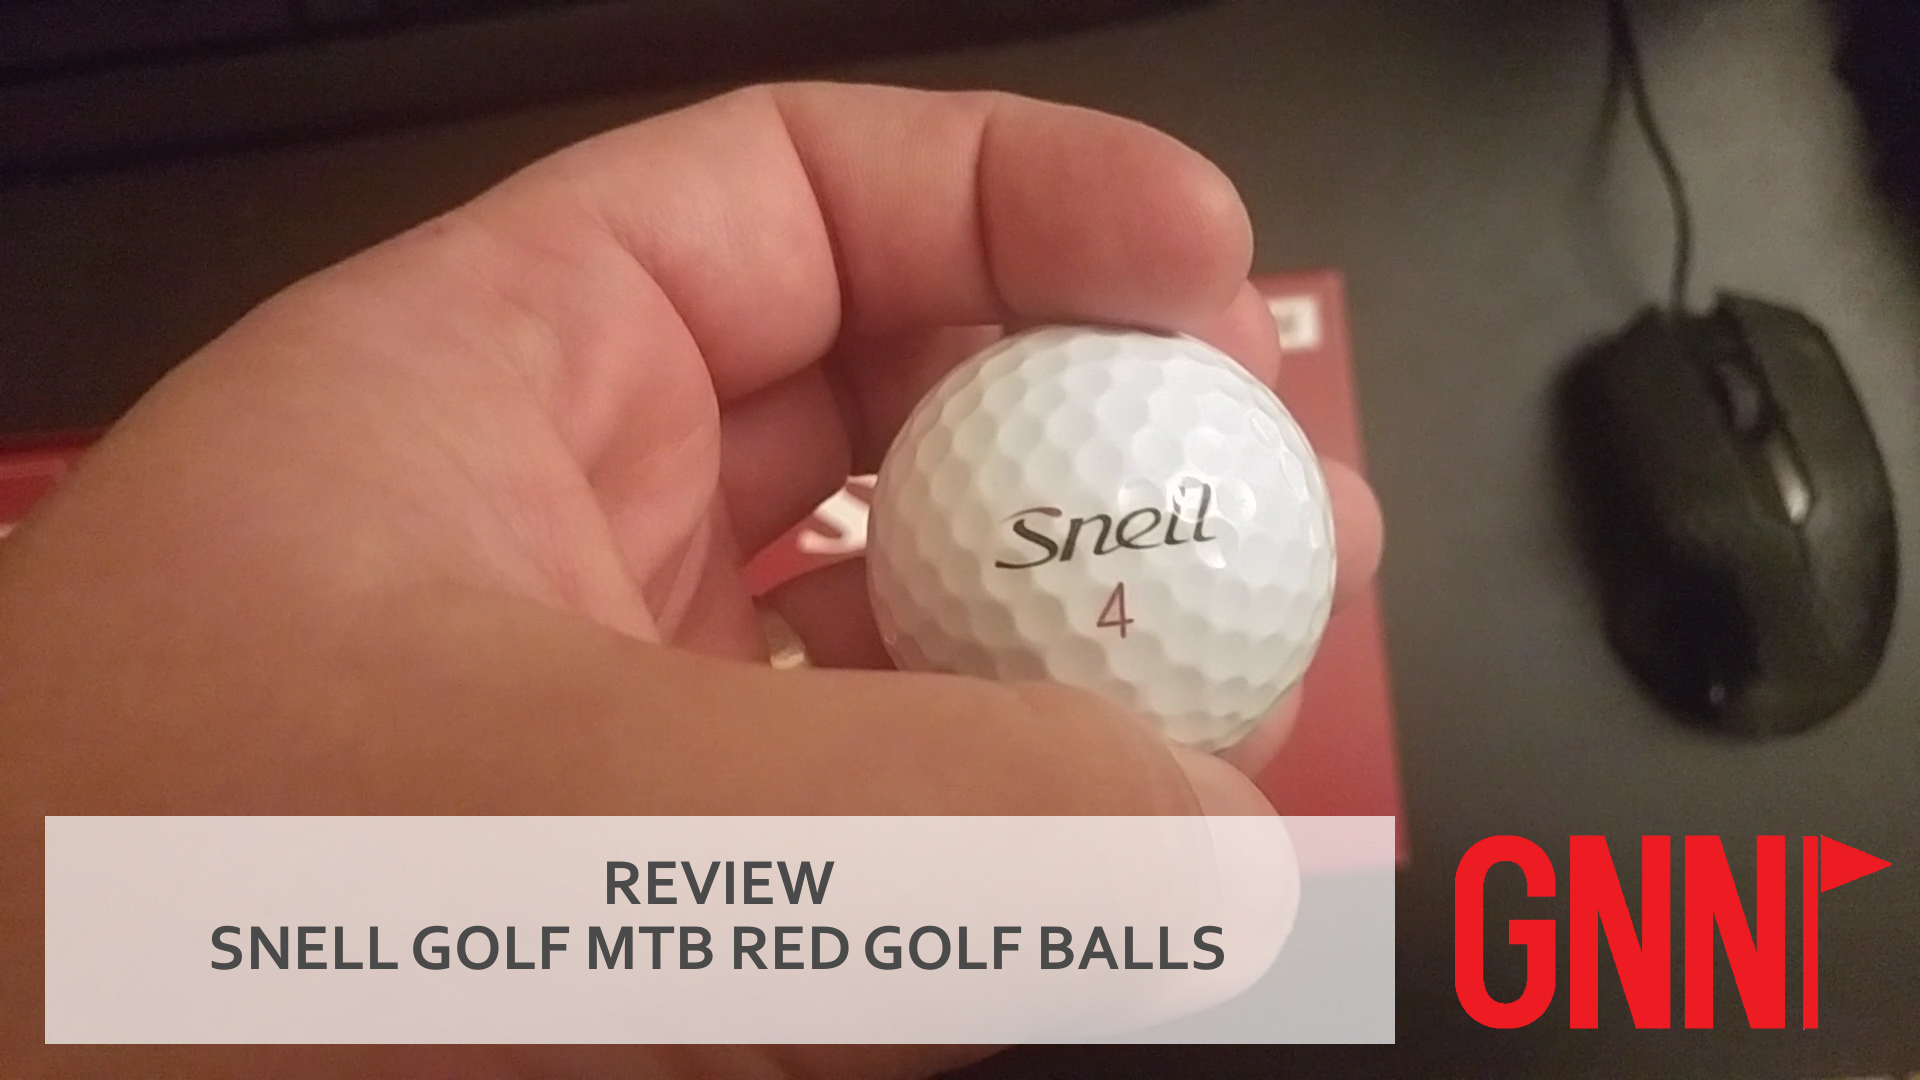 PLAYING REVIEW: Snell Golf MTB Red golf balls